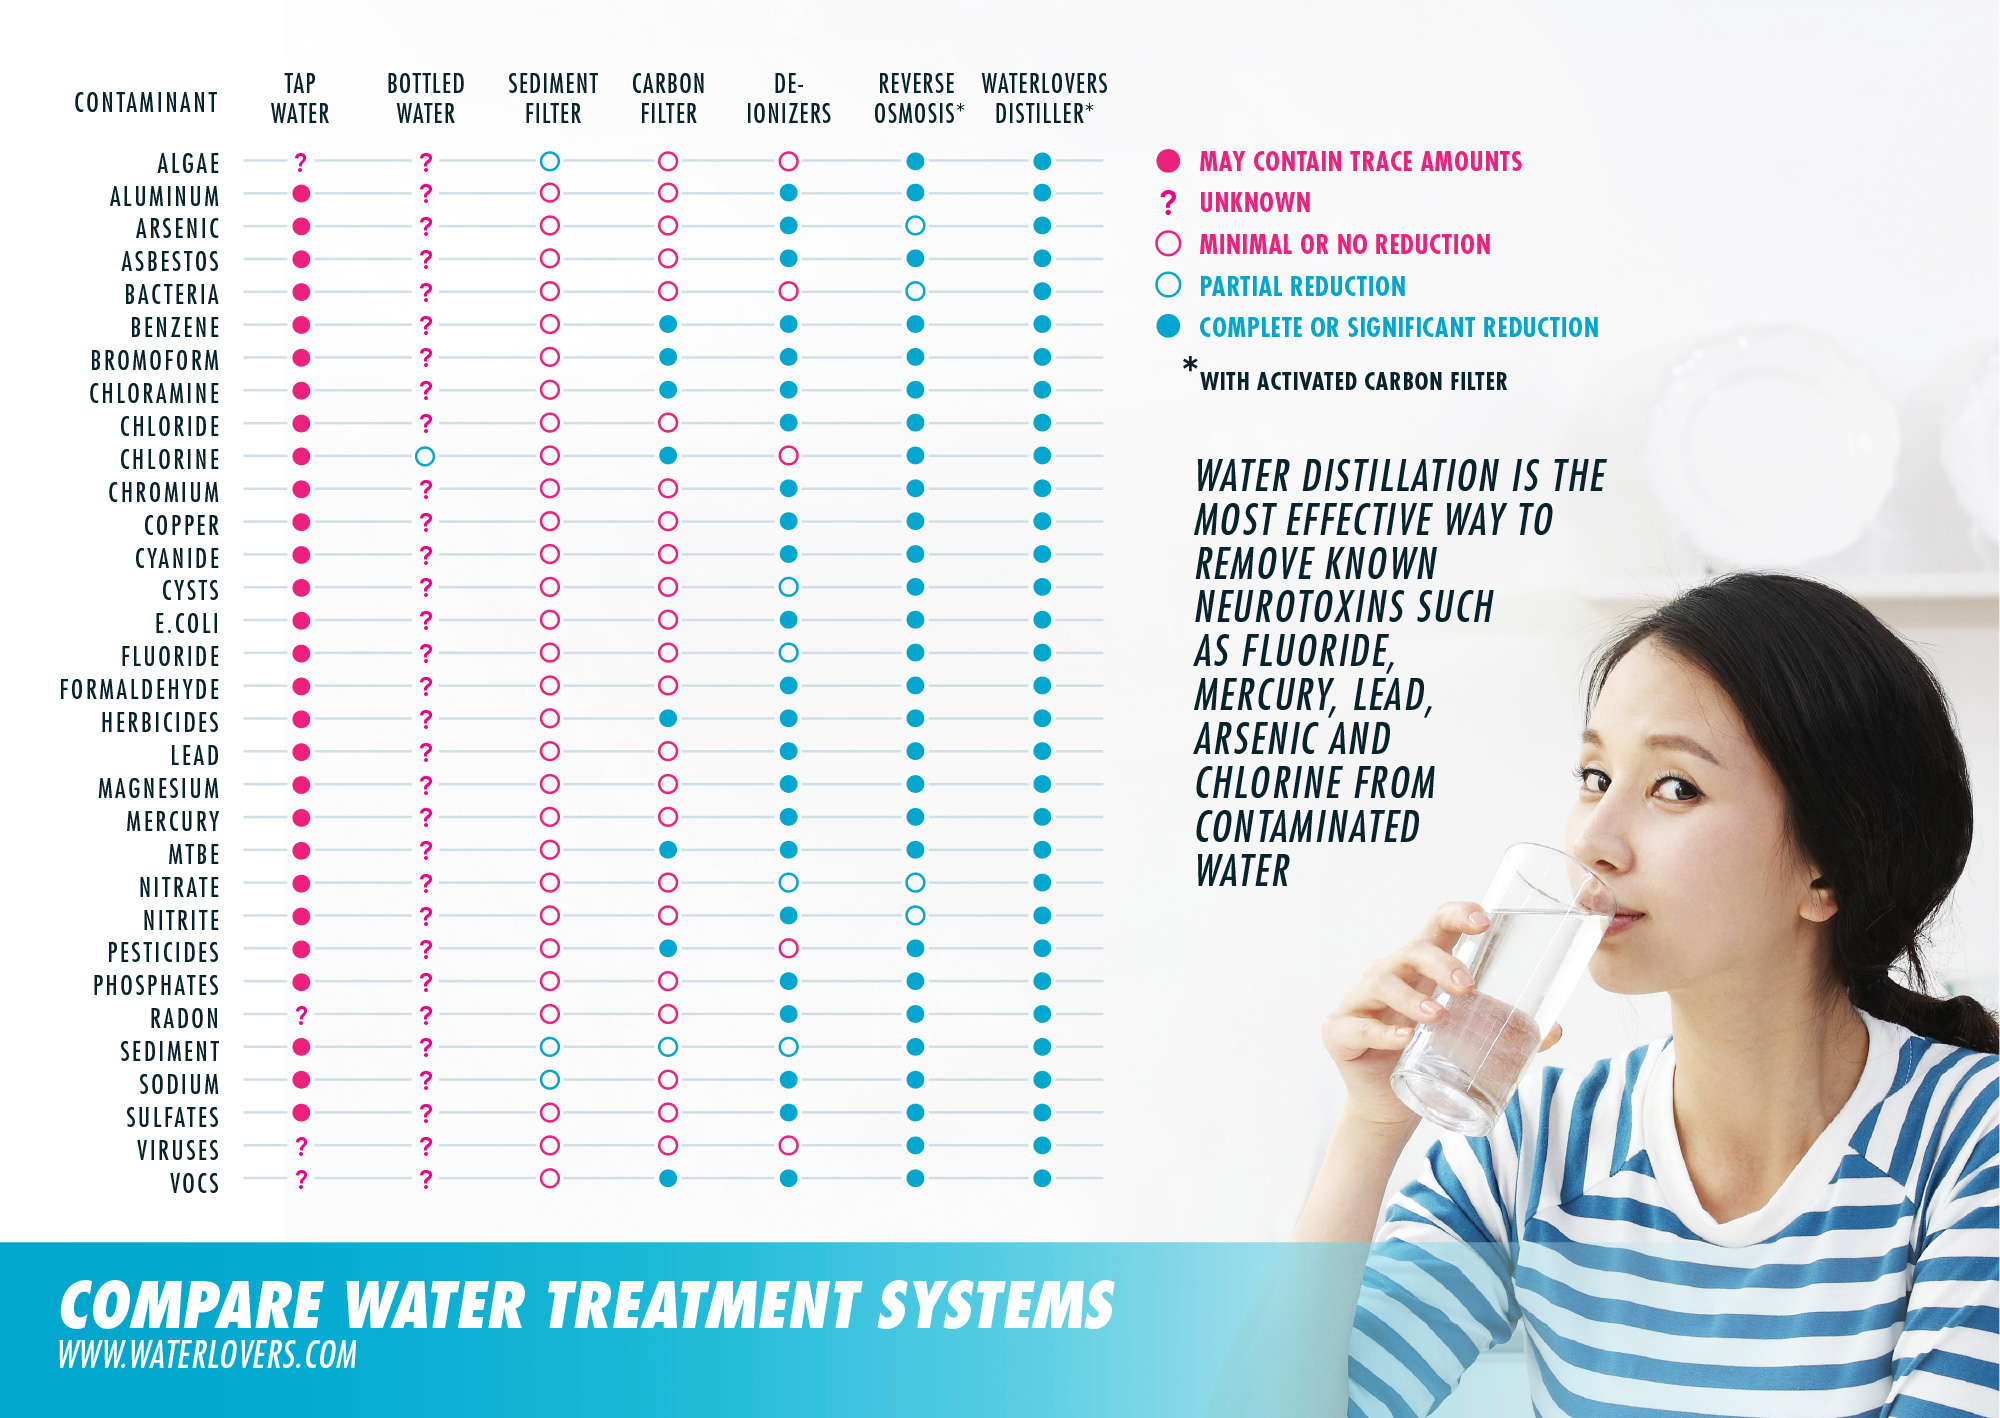 water-treatment-systems-comparison-infographic-waterlovers-water-distiller